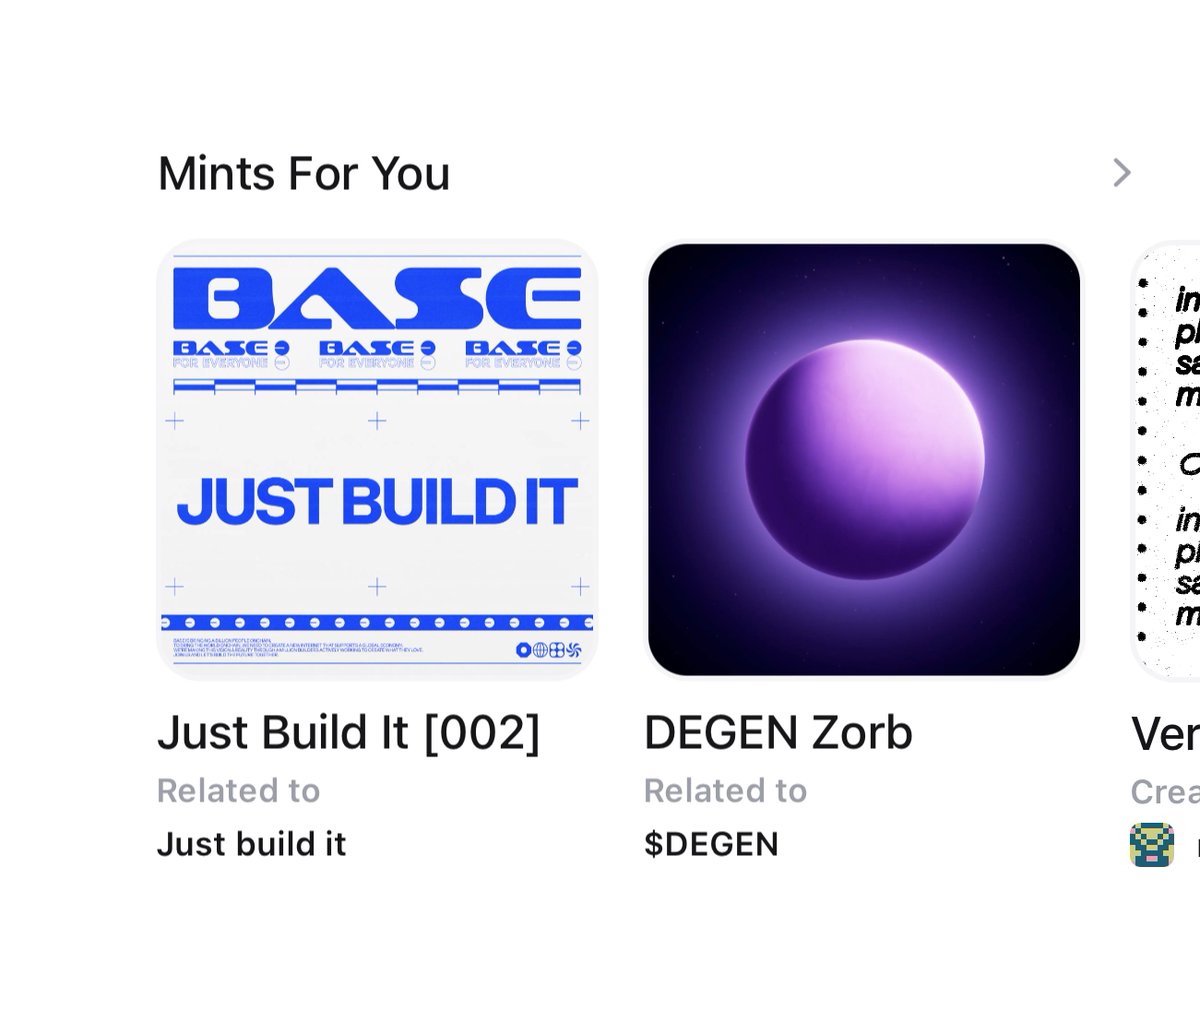 'Mints for you' have launched on @zerion's incredible new Explore tab. These are powered by @daylight and are related to tokens you hold, from creators you have minted from before, and more. Stoked to have this live!